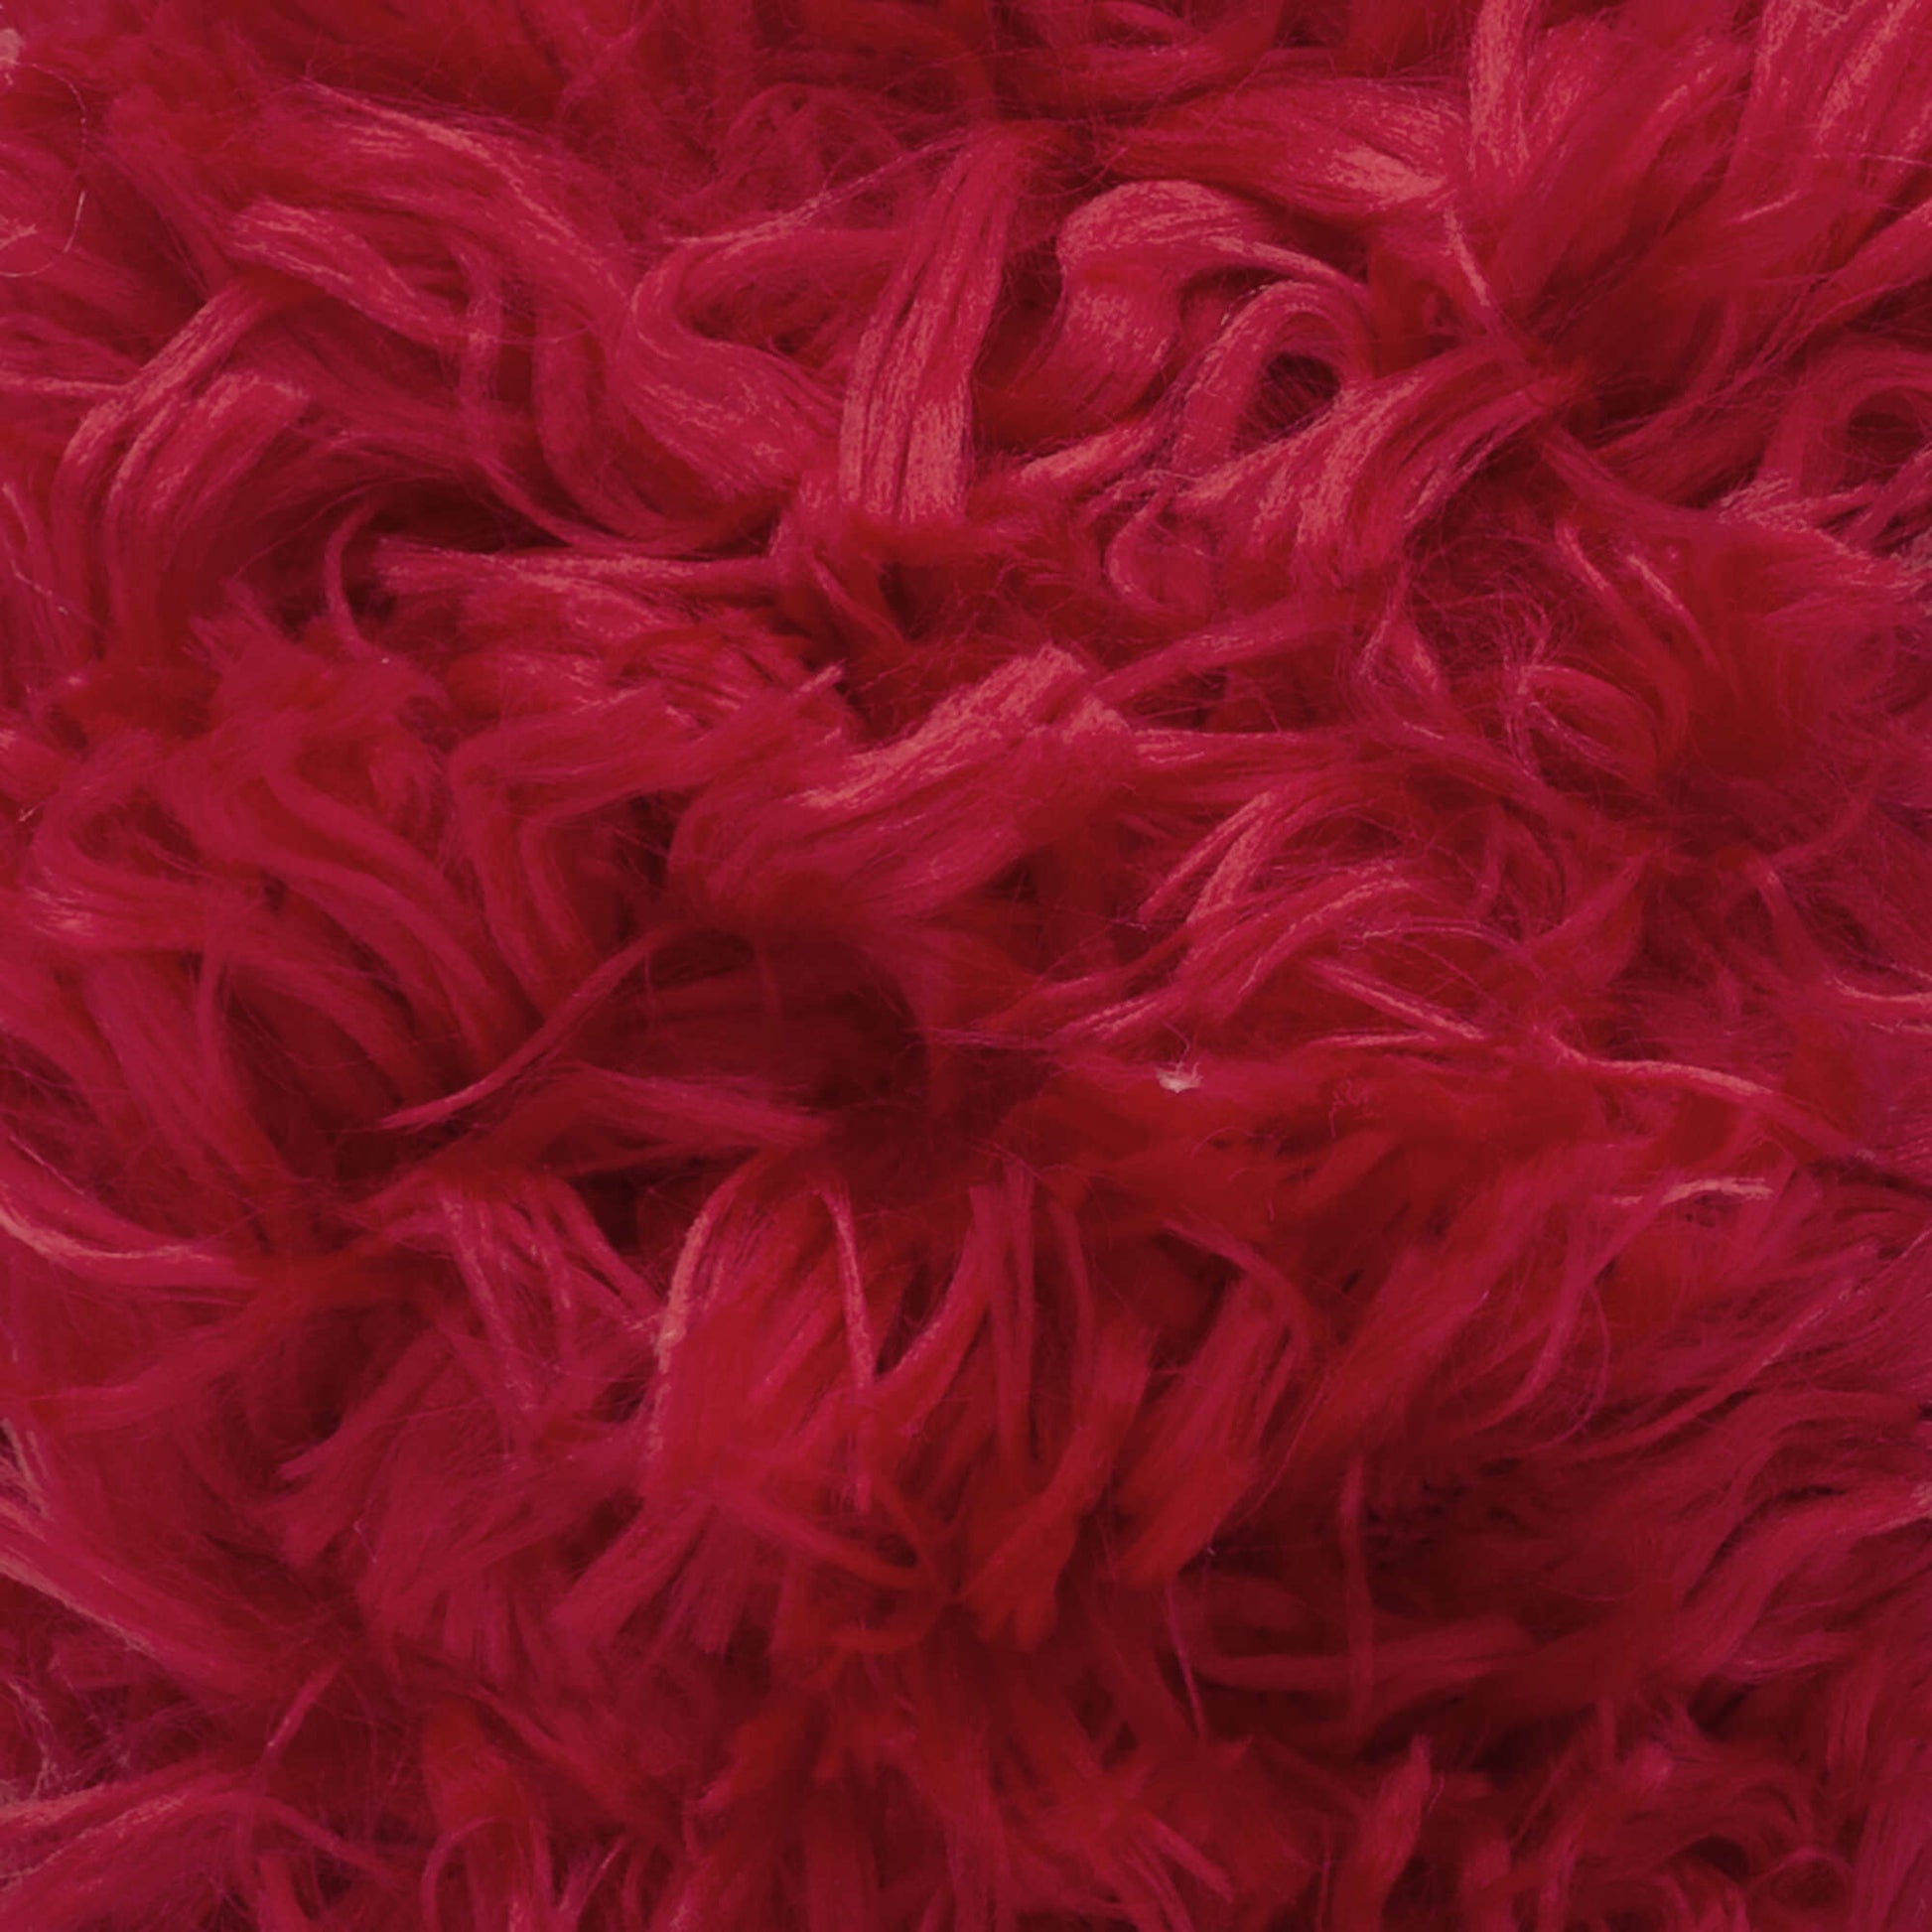 Red Heart Fur Yarn - Discontinued shades Cherry